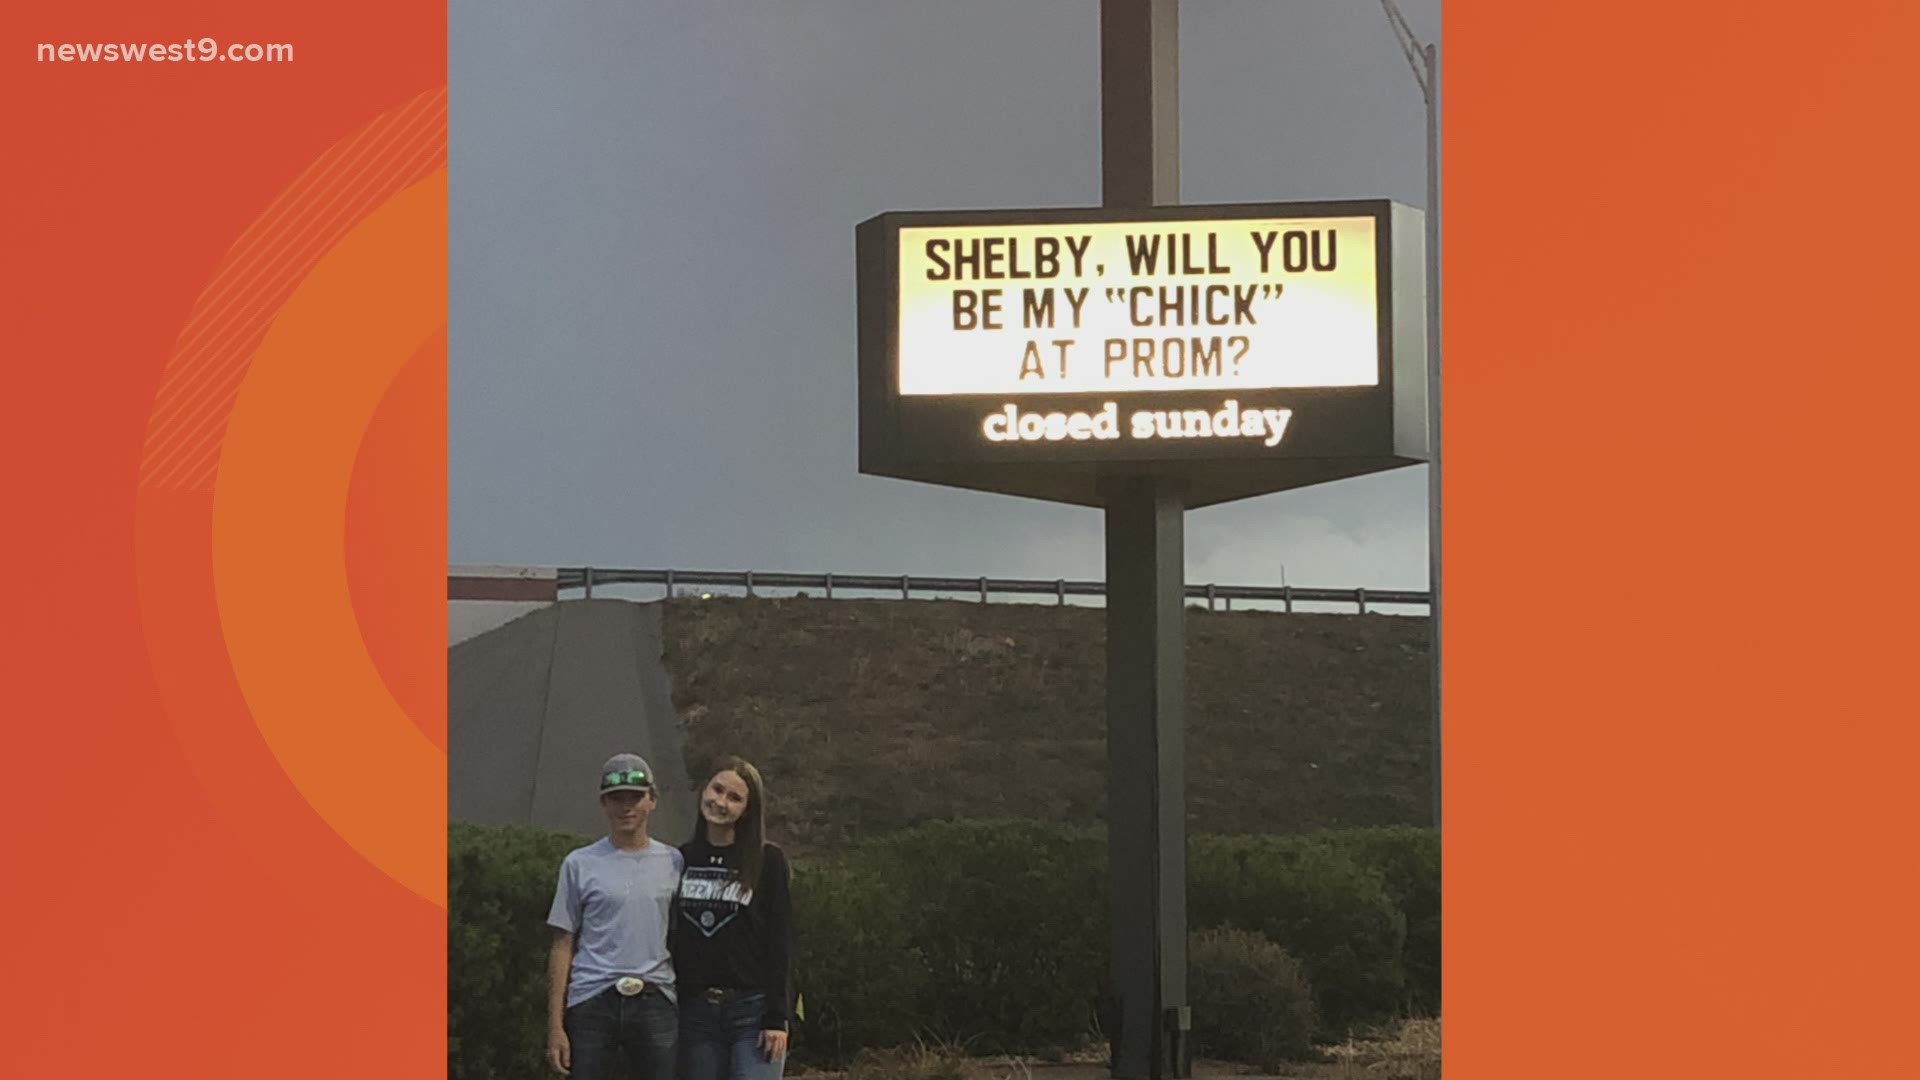 Kaleb Nance received some help from his job to ask his friend Shelby Matthews to their prom at Greenwood High School.